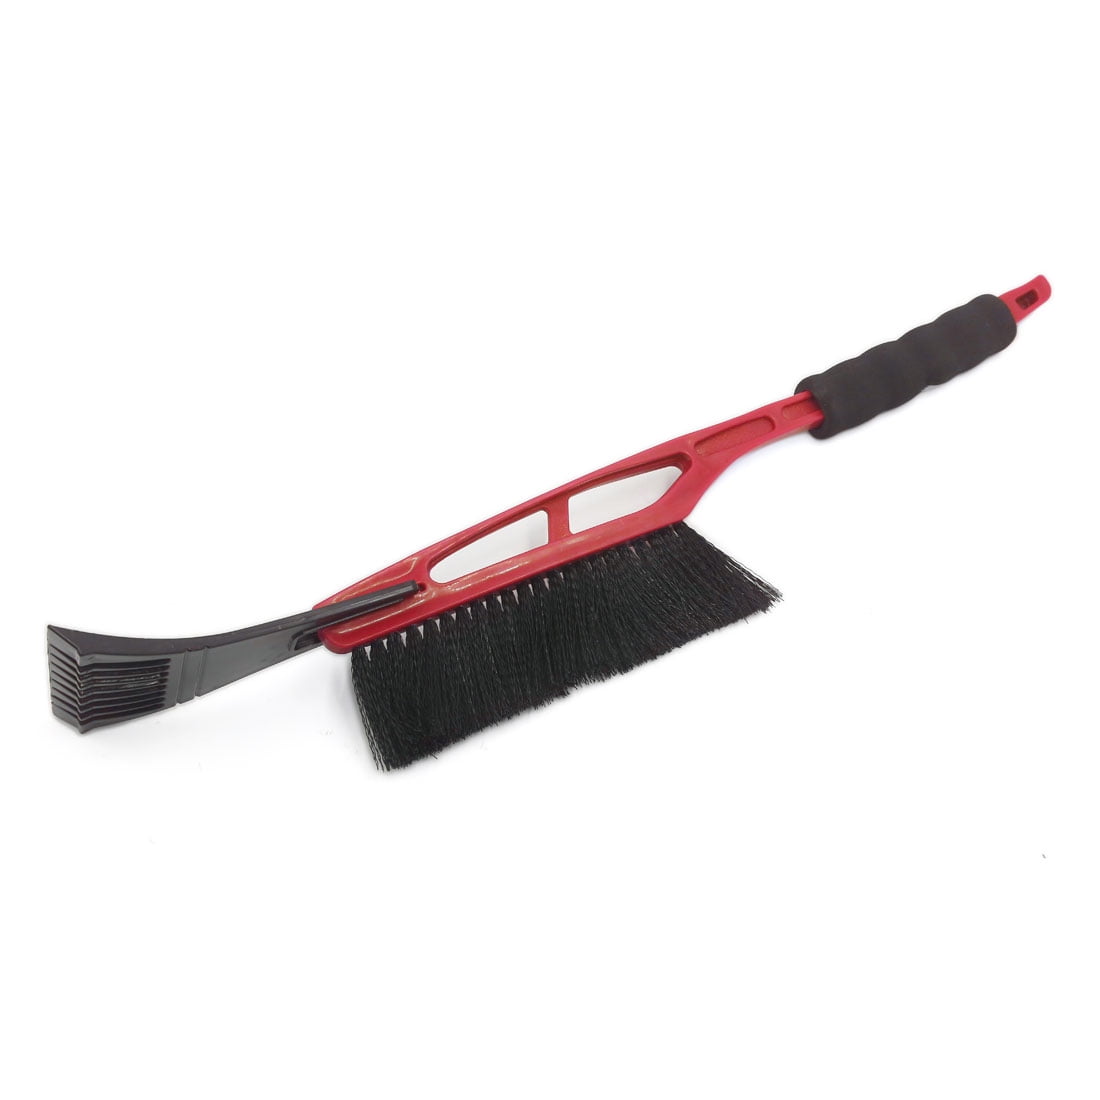  Labeol 43 Snow Brush and Ice Scraper for Car